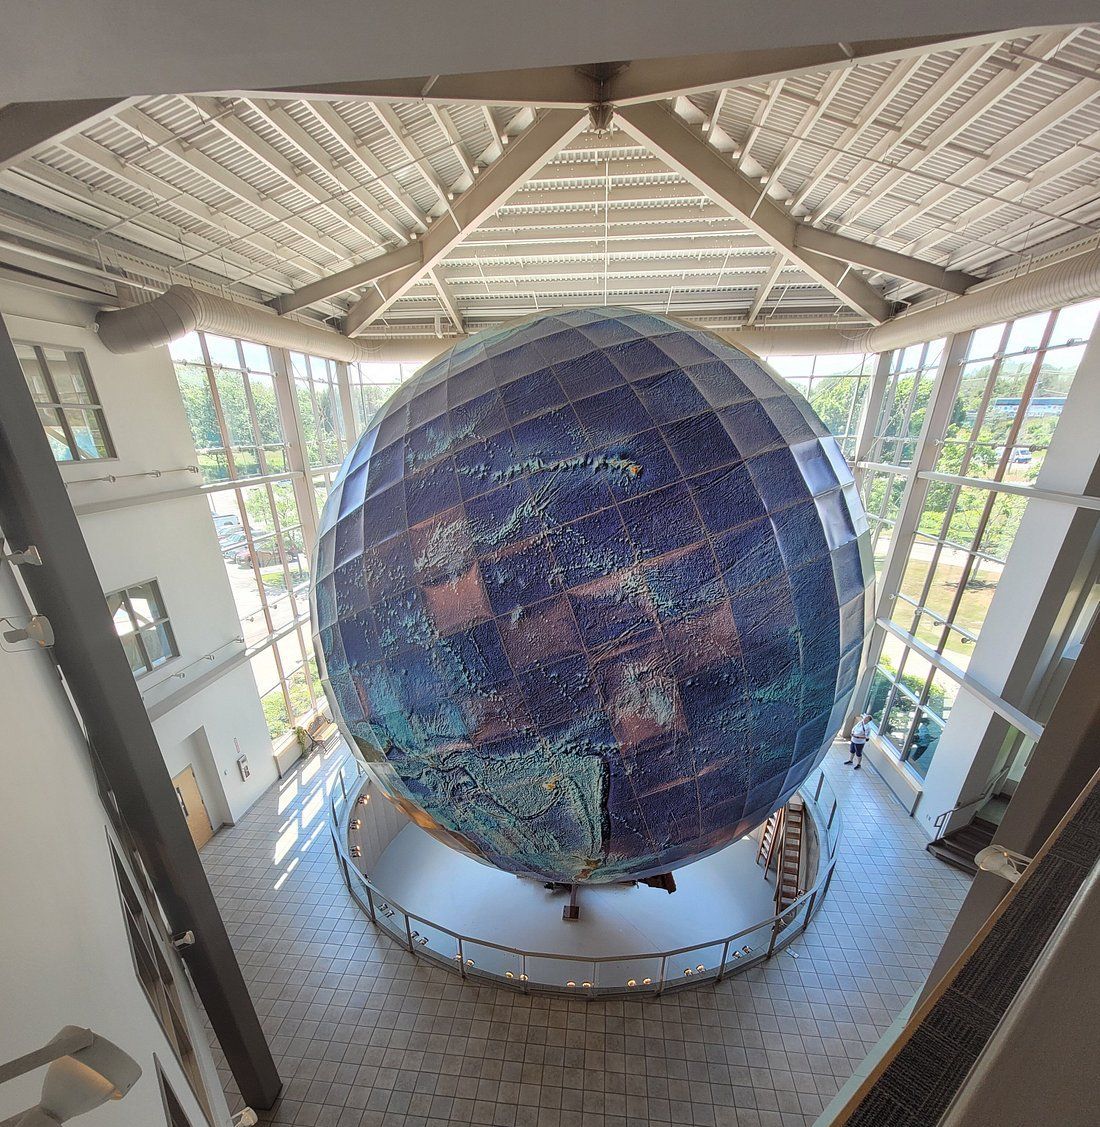 World's Largest Rotating and Revolving Globe, world record in Yarmouth, Maine
